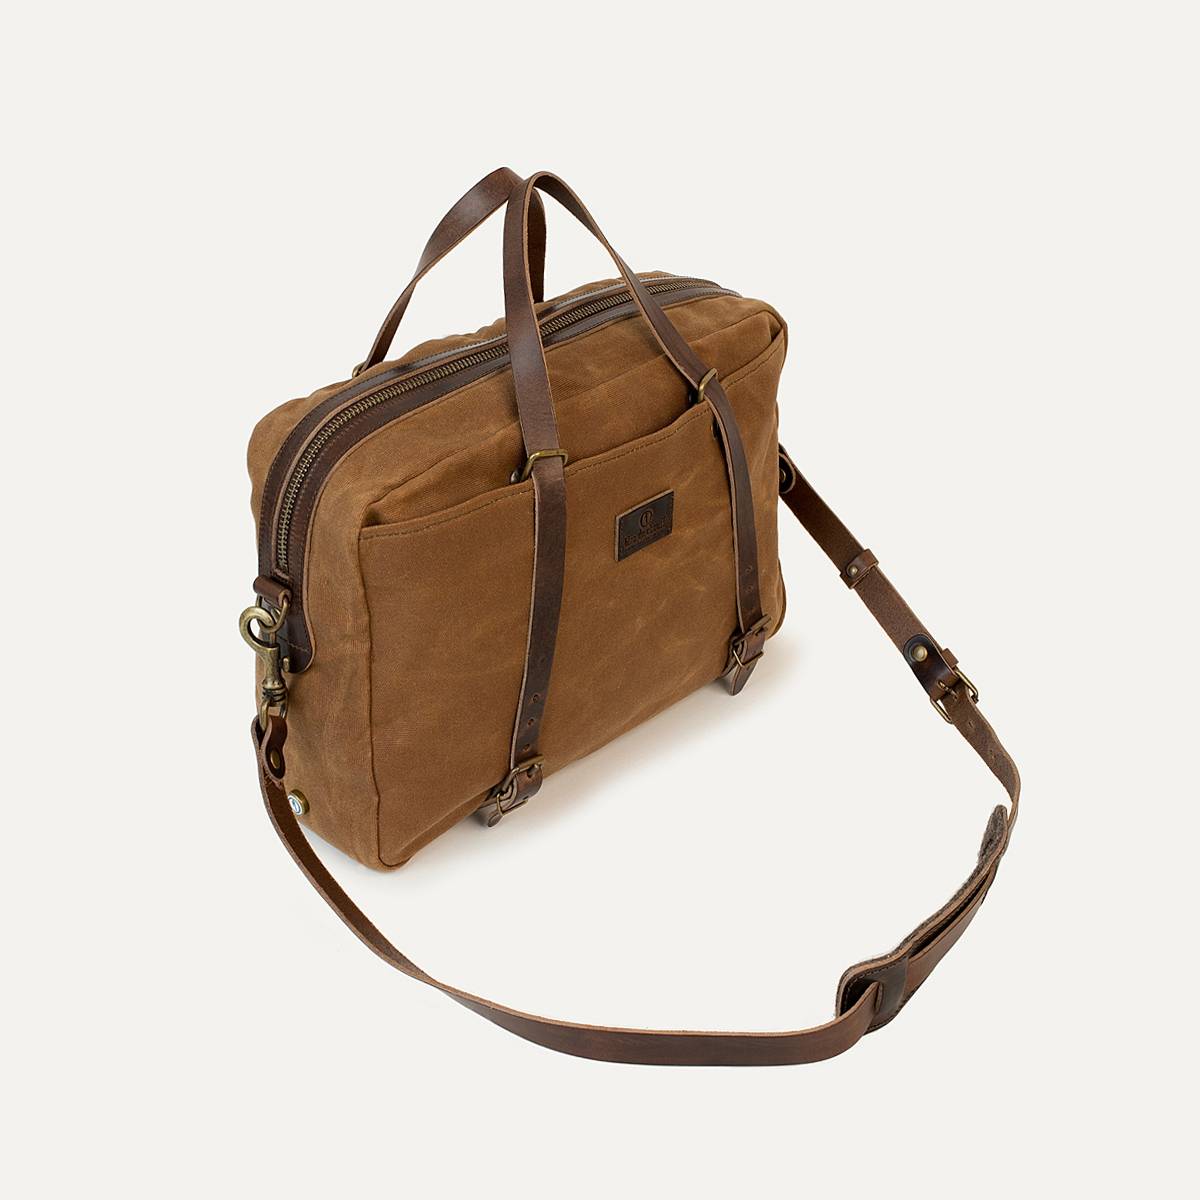 Business bag Report WAXY - Camel (image n°3)